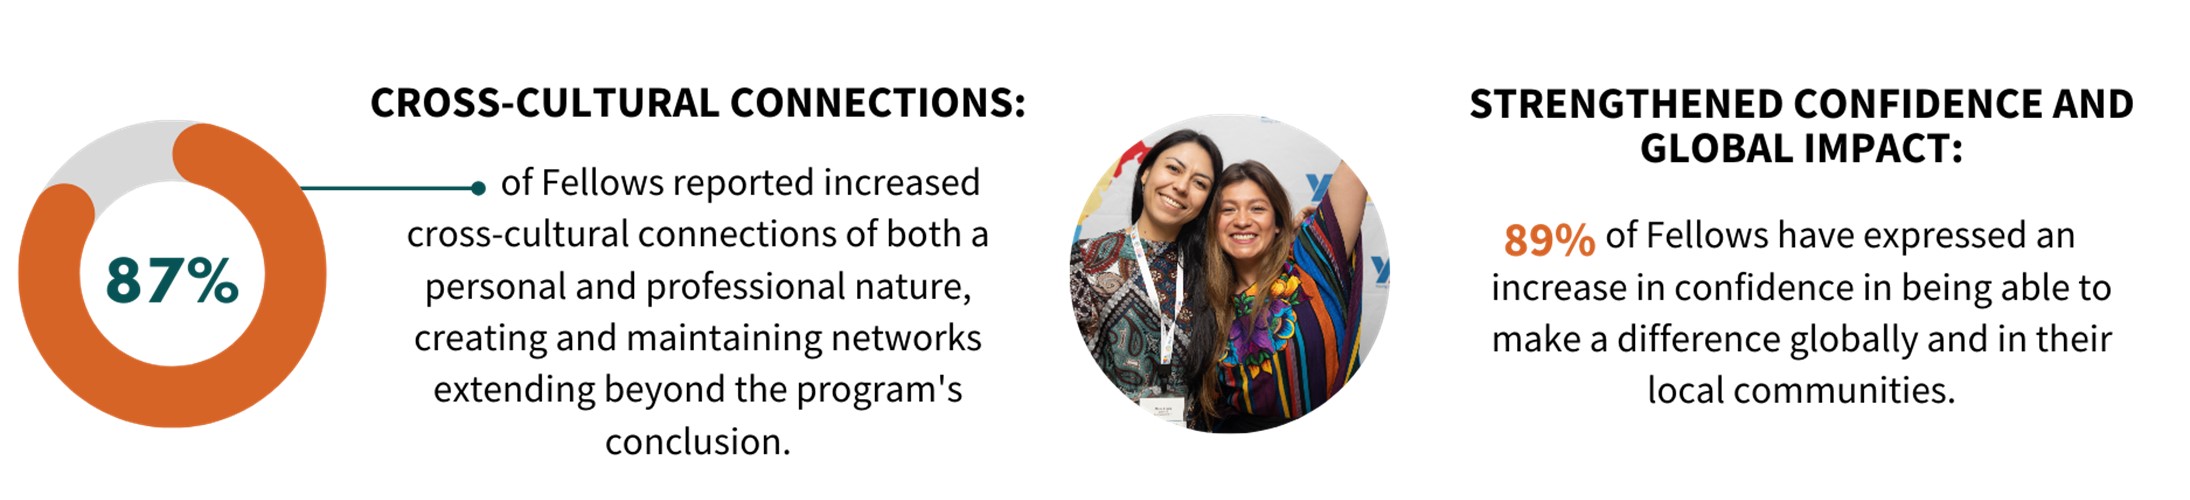 Graphic that reads: Strengthened confidence and global impact: 89% of Fellows have expressed an increase in confidence in being able to make a difference globally and in their local communities. Cross-cultural connections: 87% of Fellows reported increased cross-cultural connections of both a personal and professional nature, creating and maintaining networks extending beyond the program's conclusion.